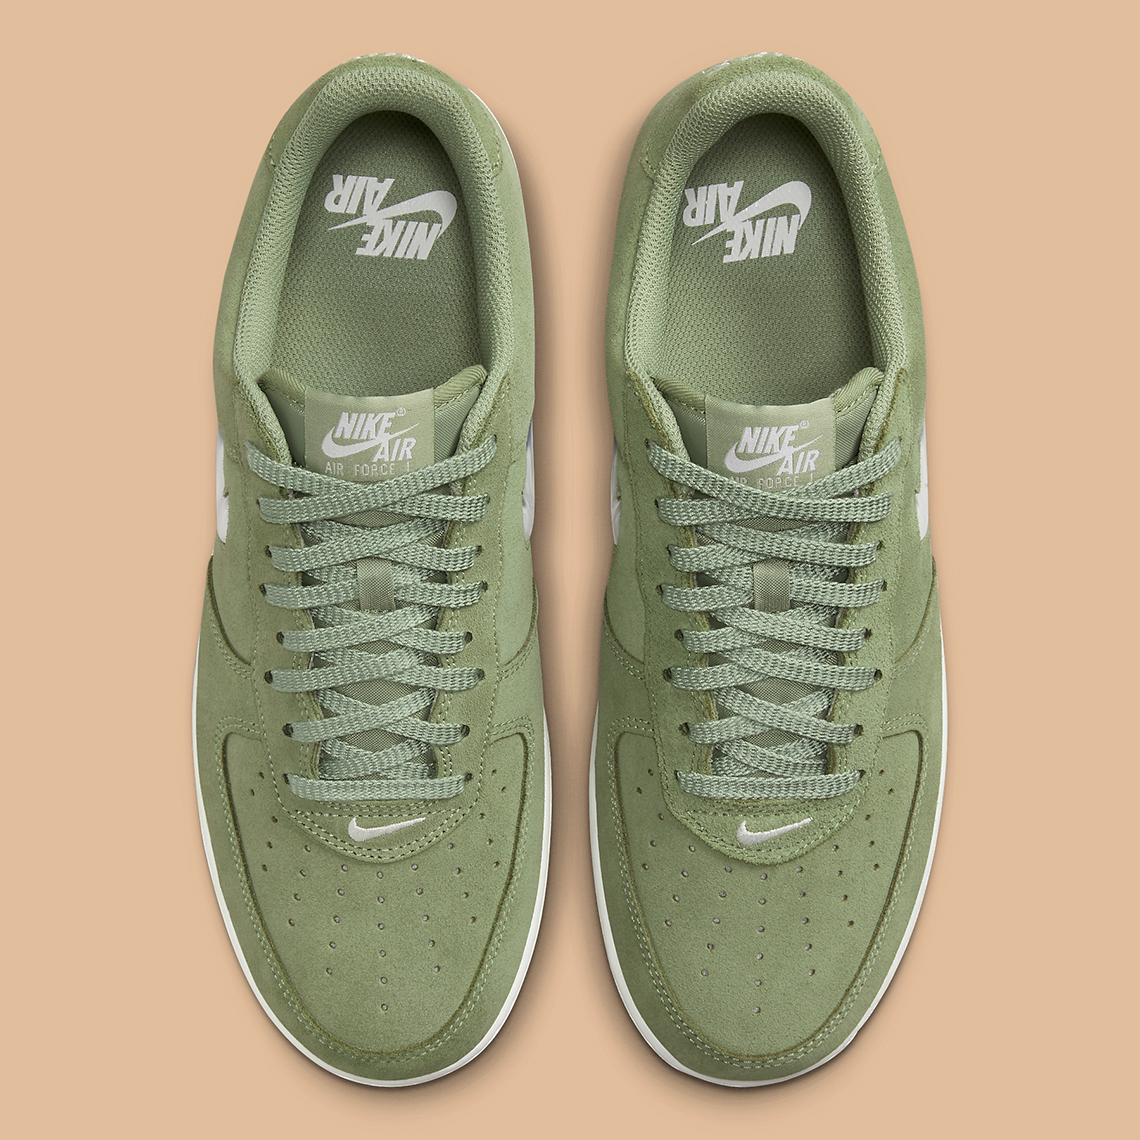 nike air force 1 low color of the month green suede dv0785 300 5